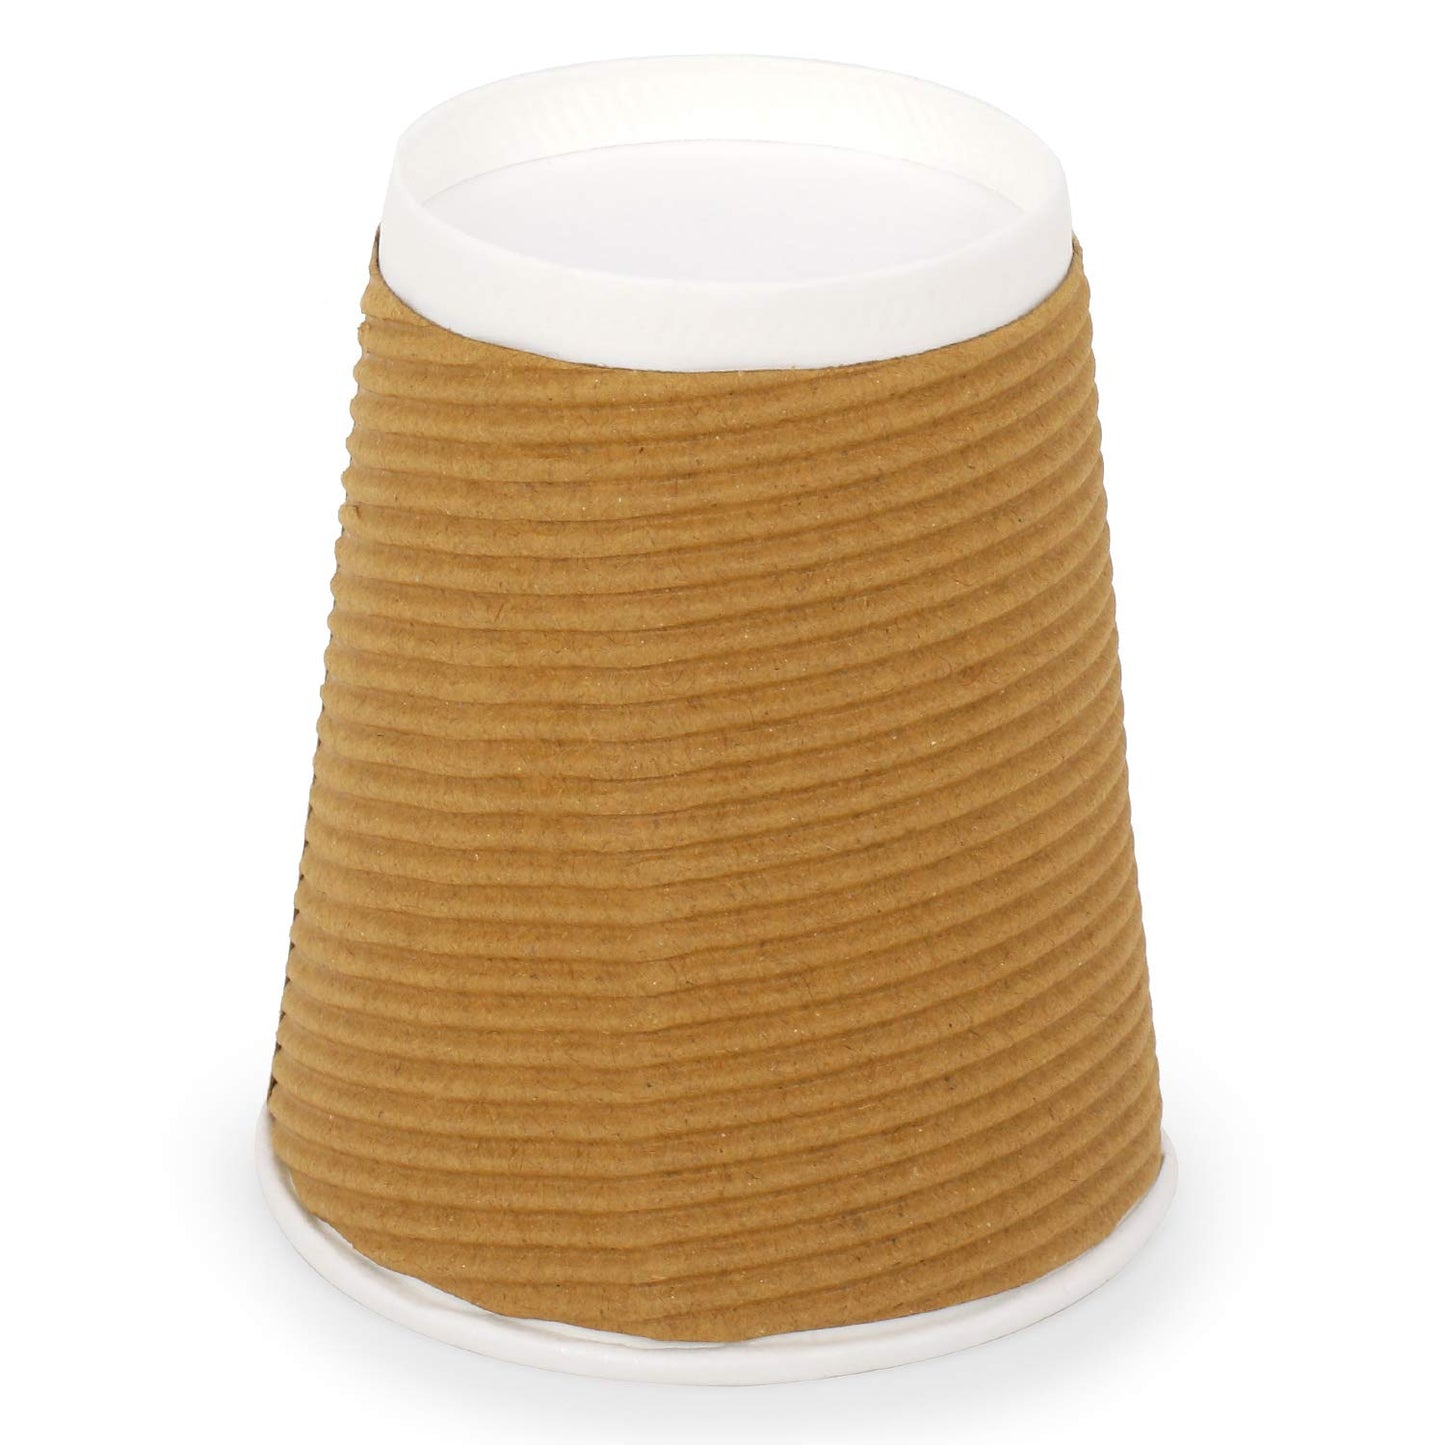 Ripple Paper Disposable Tea / Coffee Cups, 150 ml - Brown (Pack of 50)